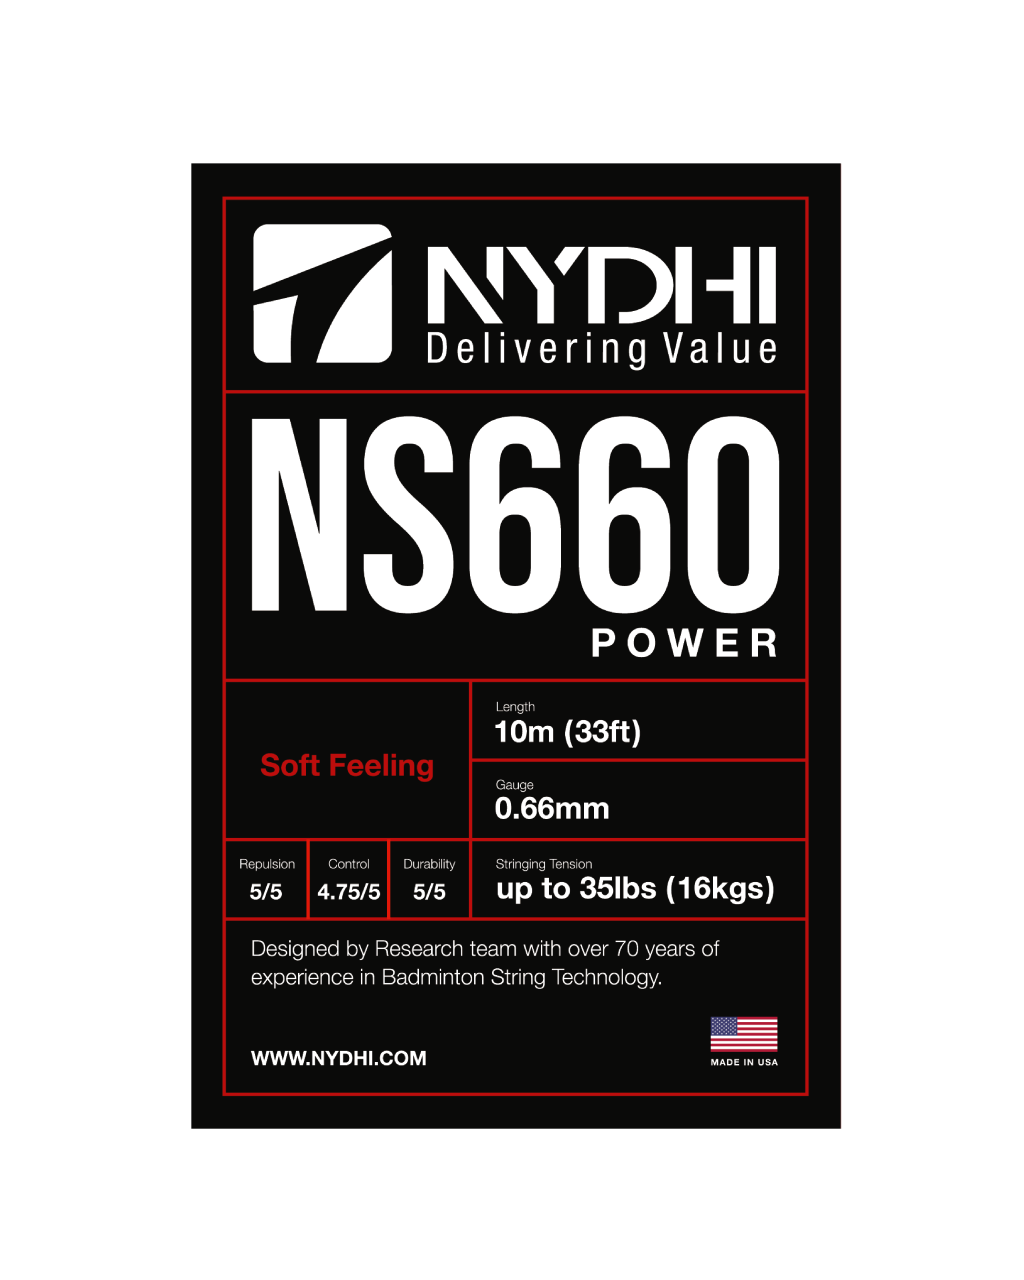 Nydhi NS660 0.66mm Ultimate Power Badminton String 10m, White